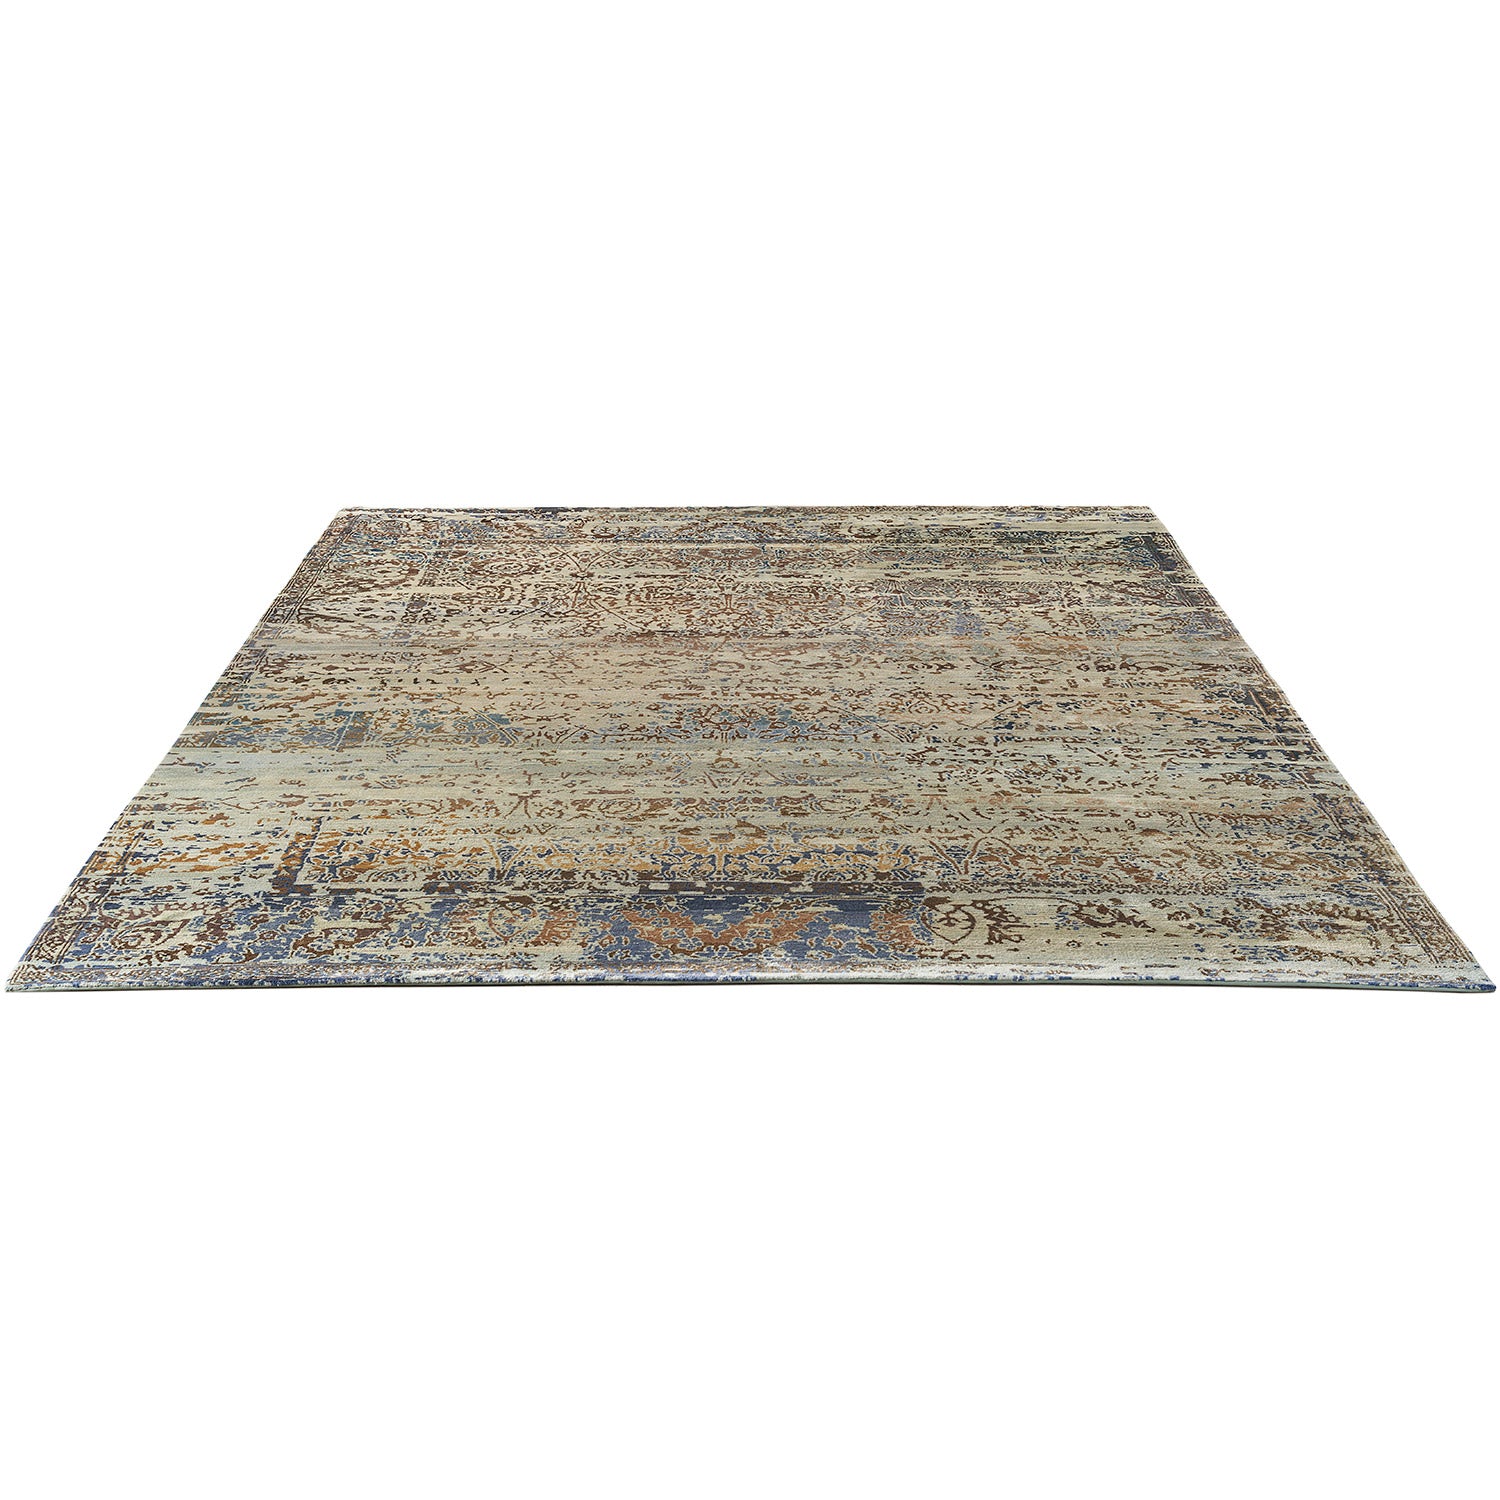 Intricate vintage rug with distressed look complements any decor style.